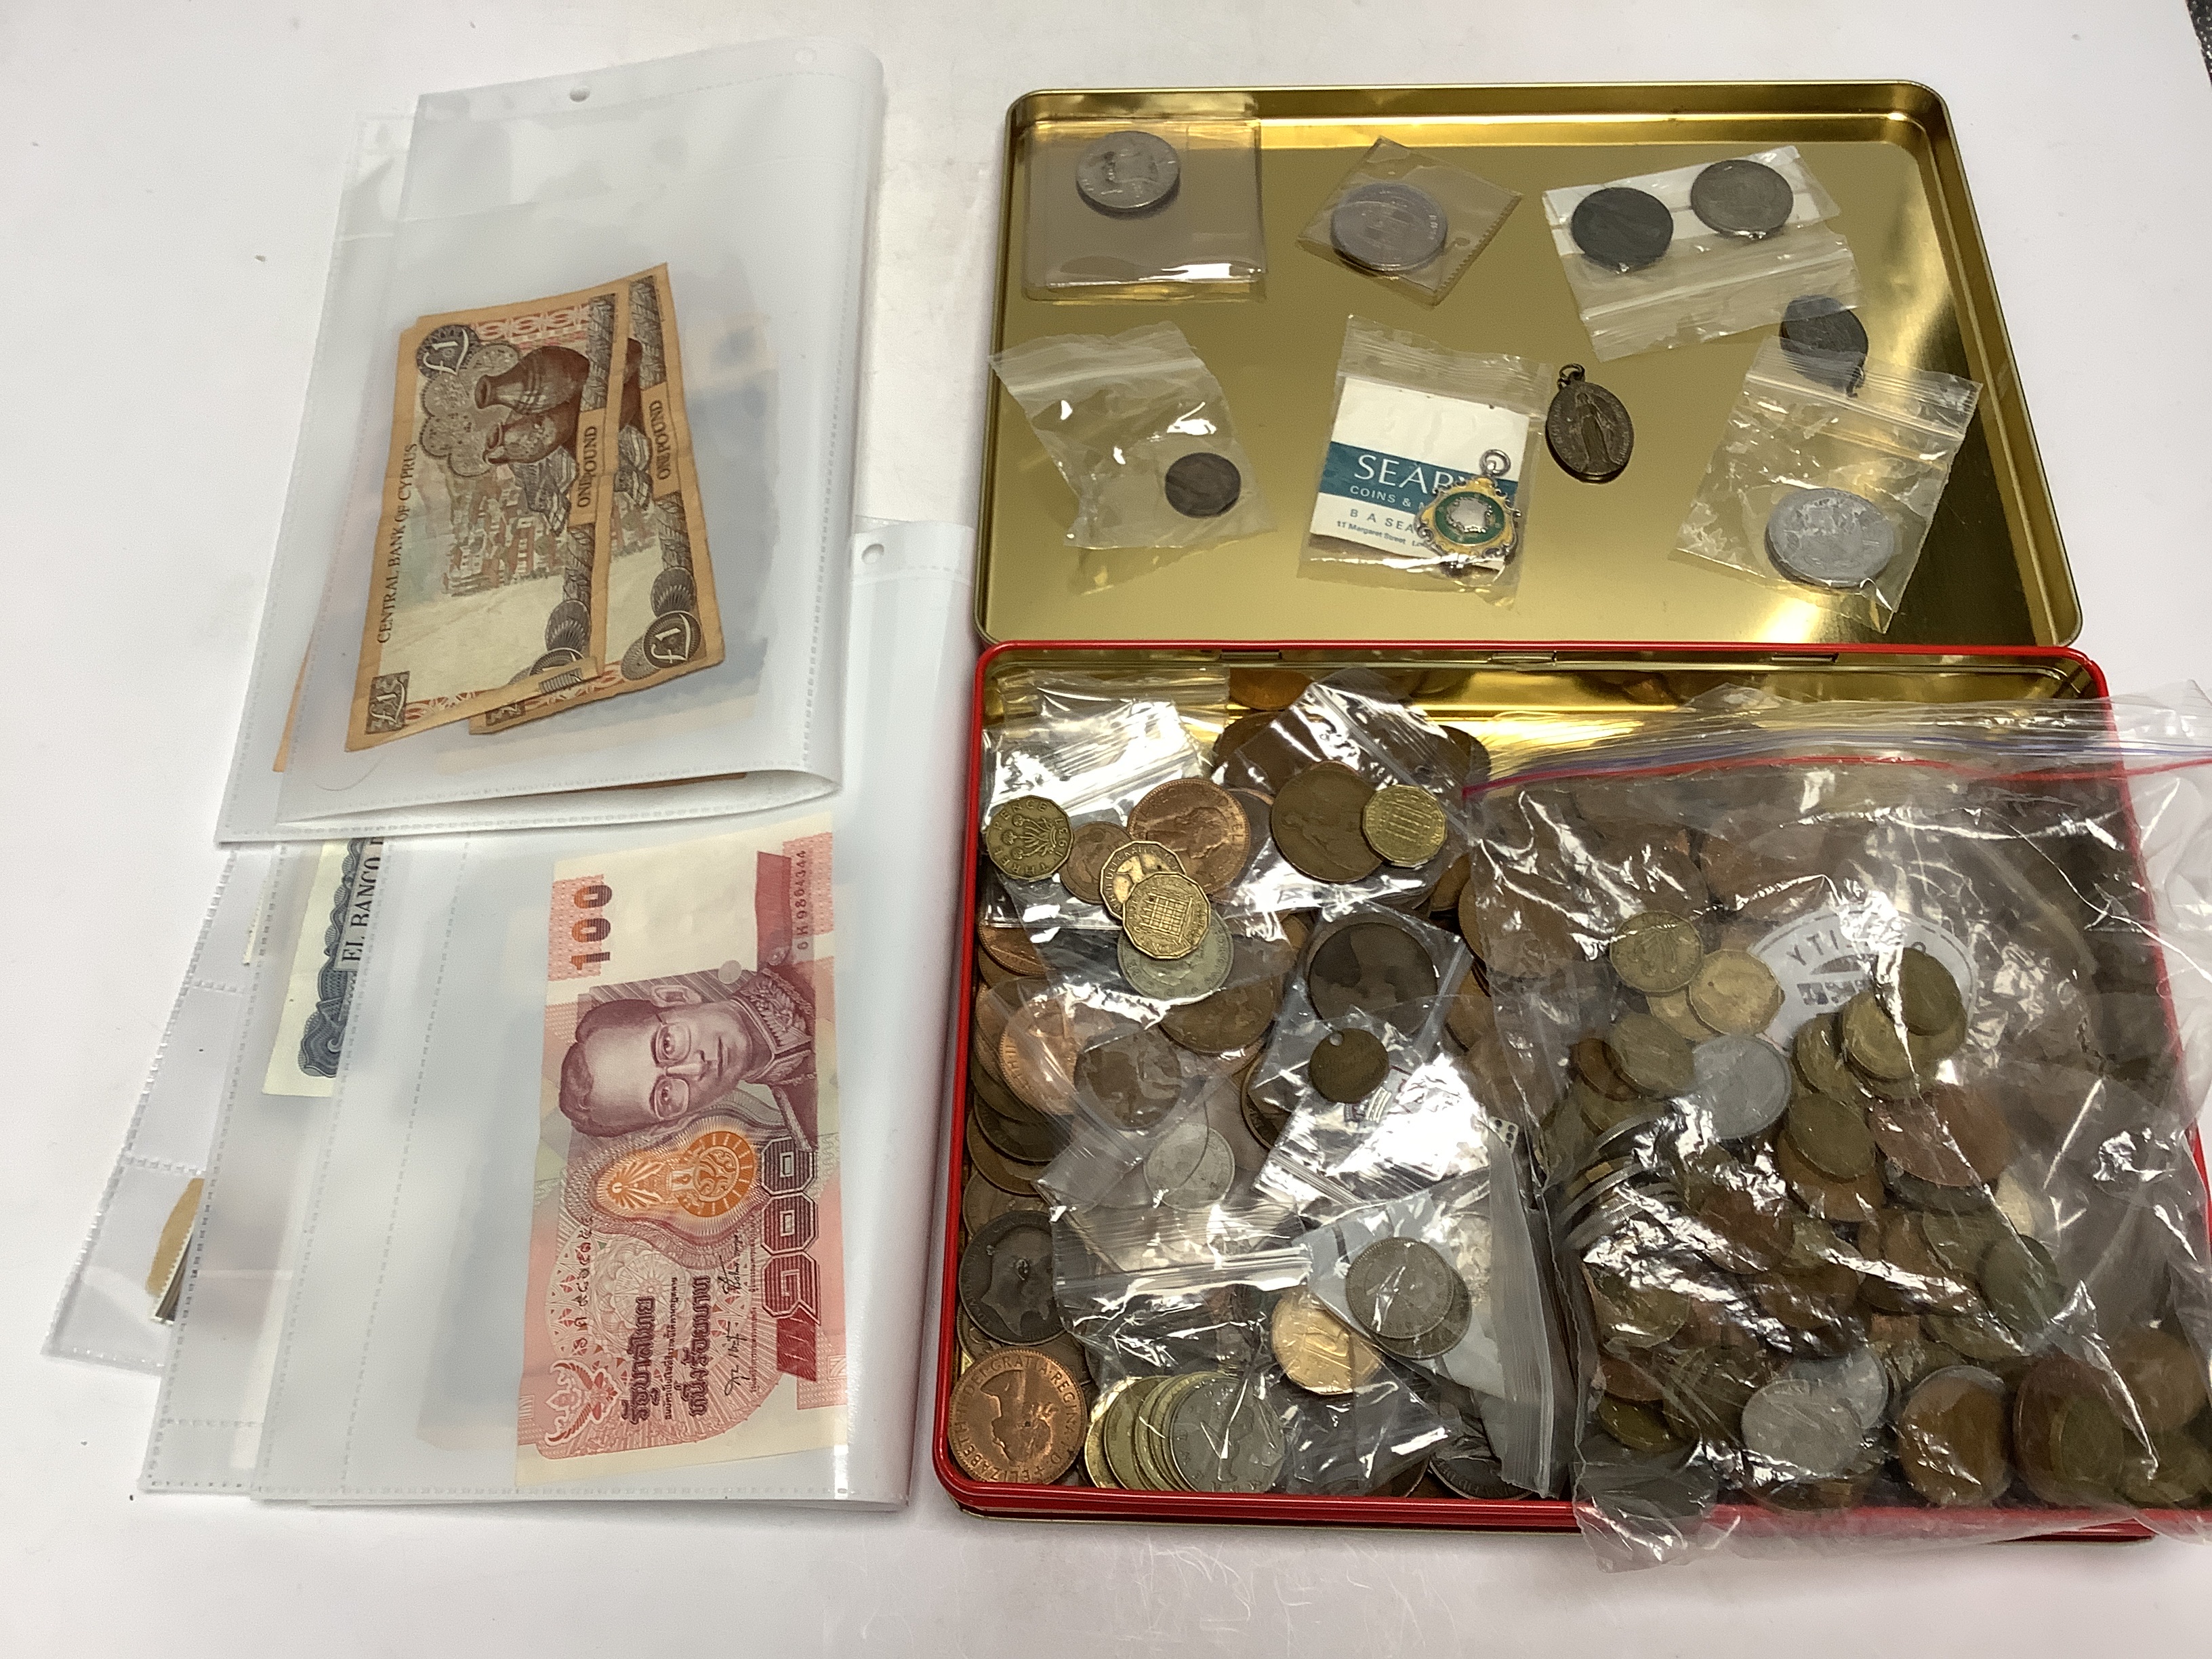 British coins, various models and bank notes, to include George V to QEII Florins, threepence, pennies, a silver and enamel football medal, German and Indonesian banknotes etc.